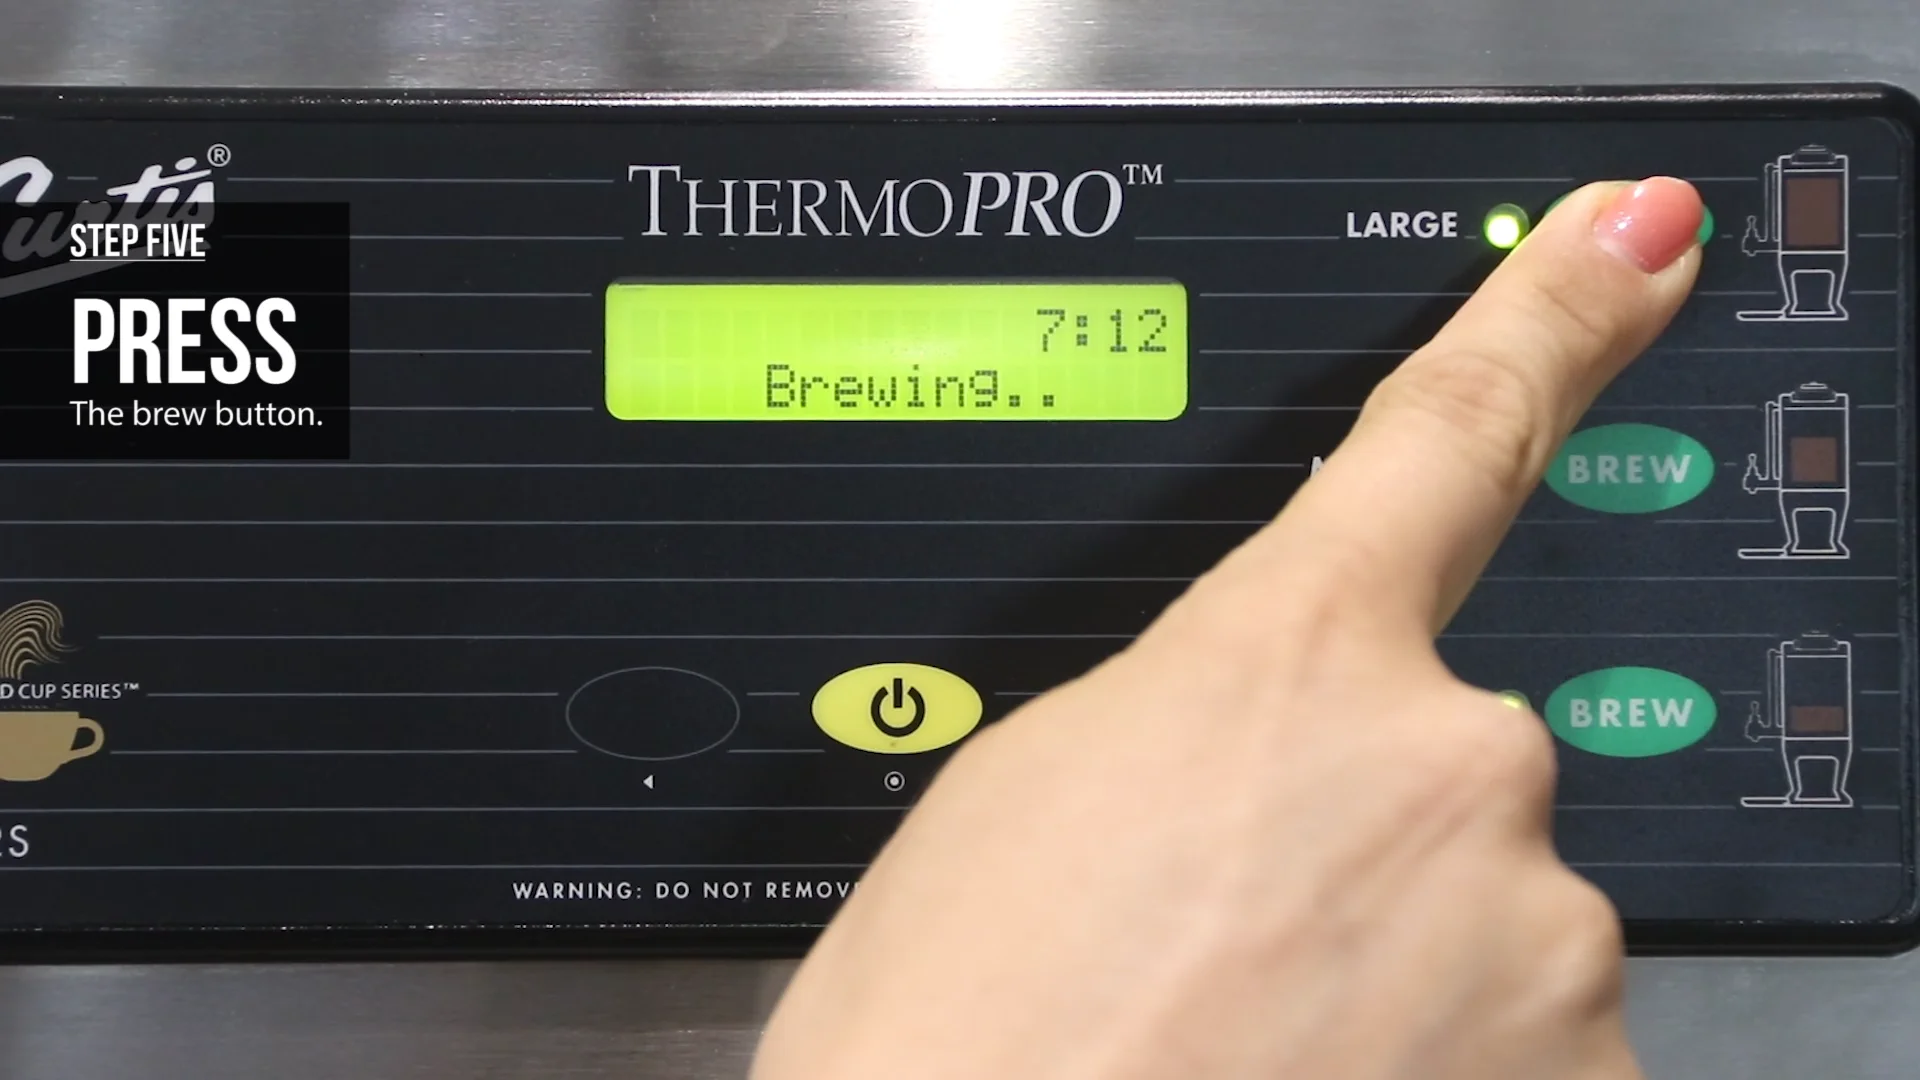 How to Operate the Curtis Airpot Thermal Commercial Coffee Brewer 